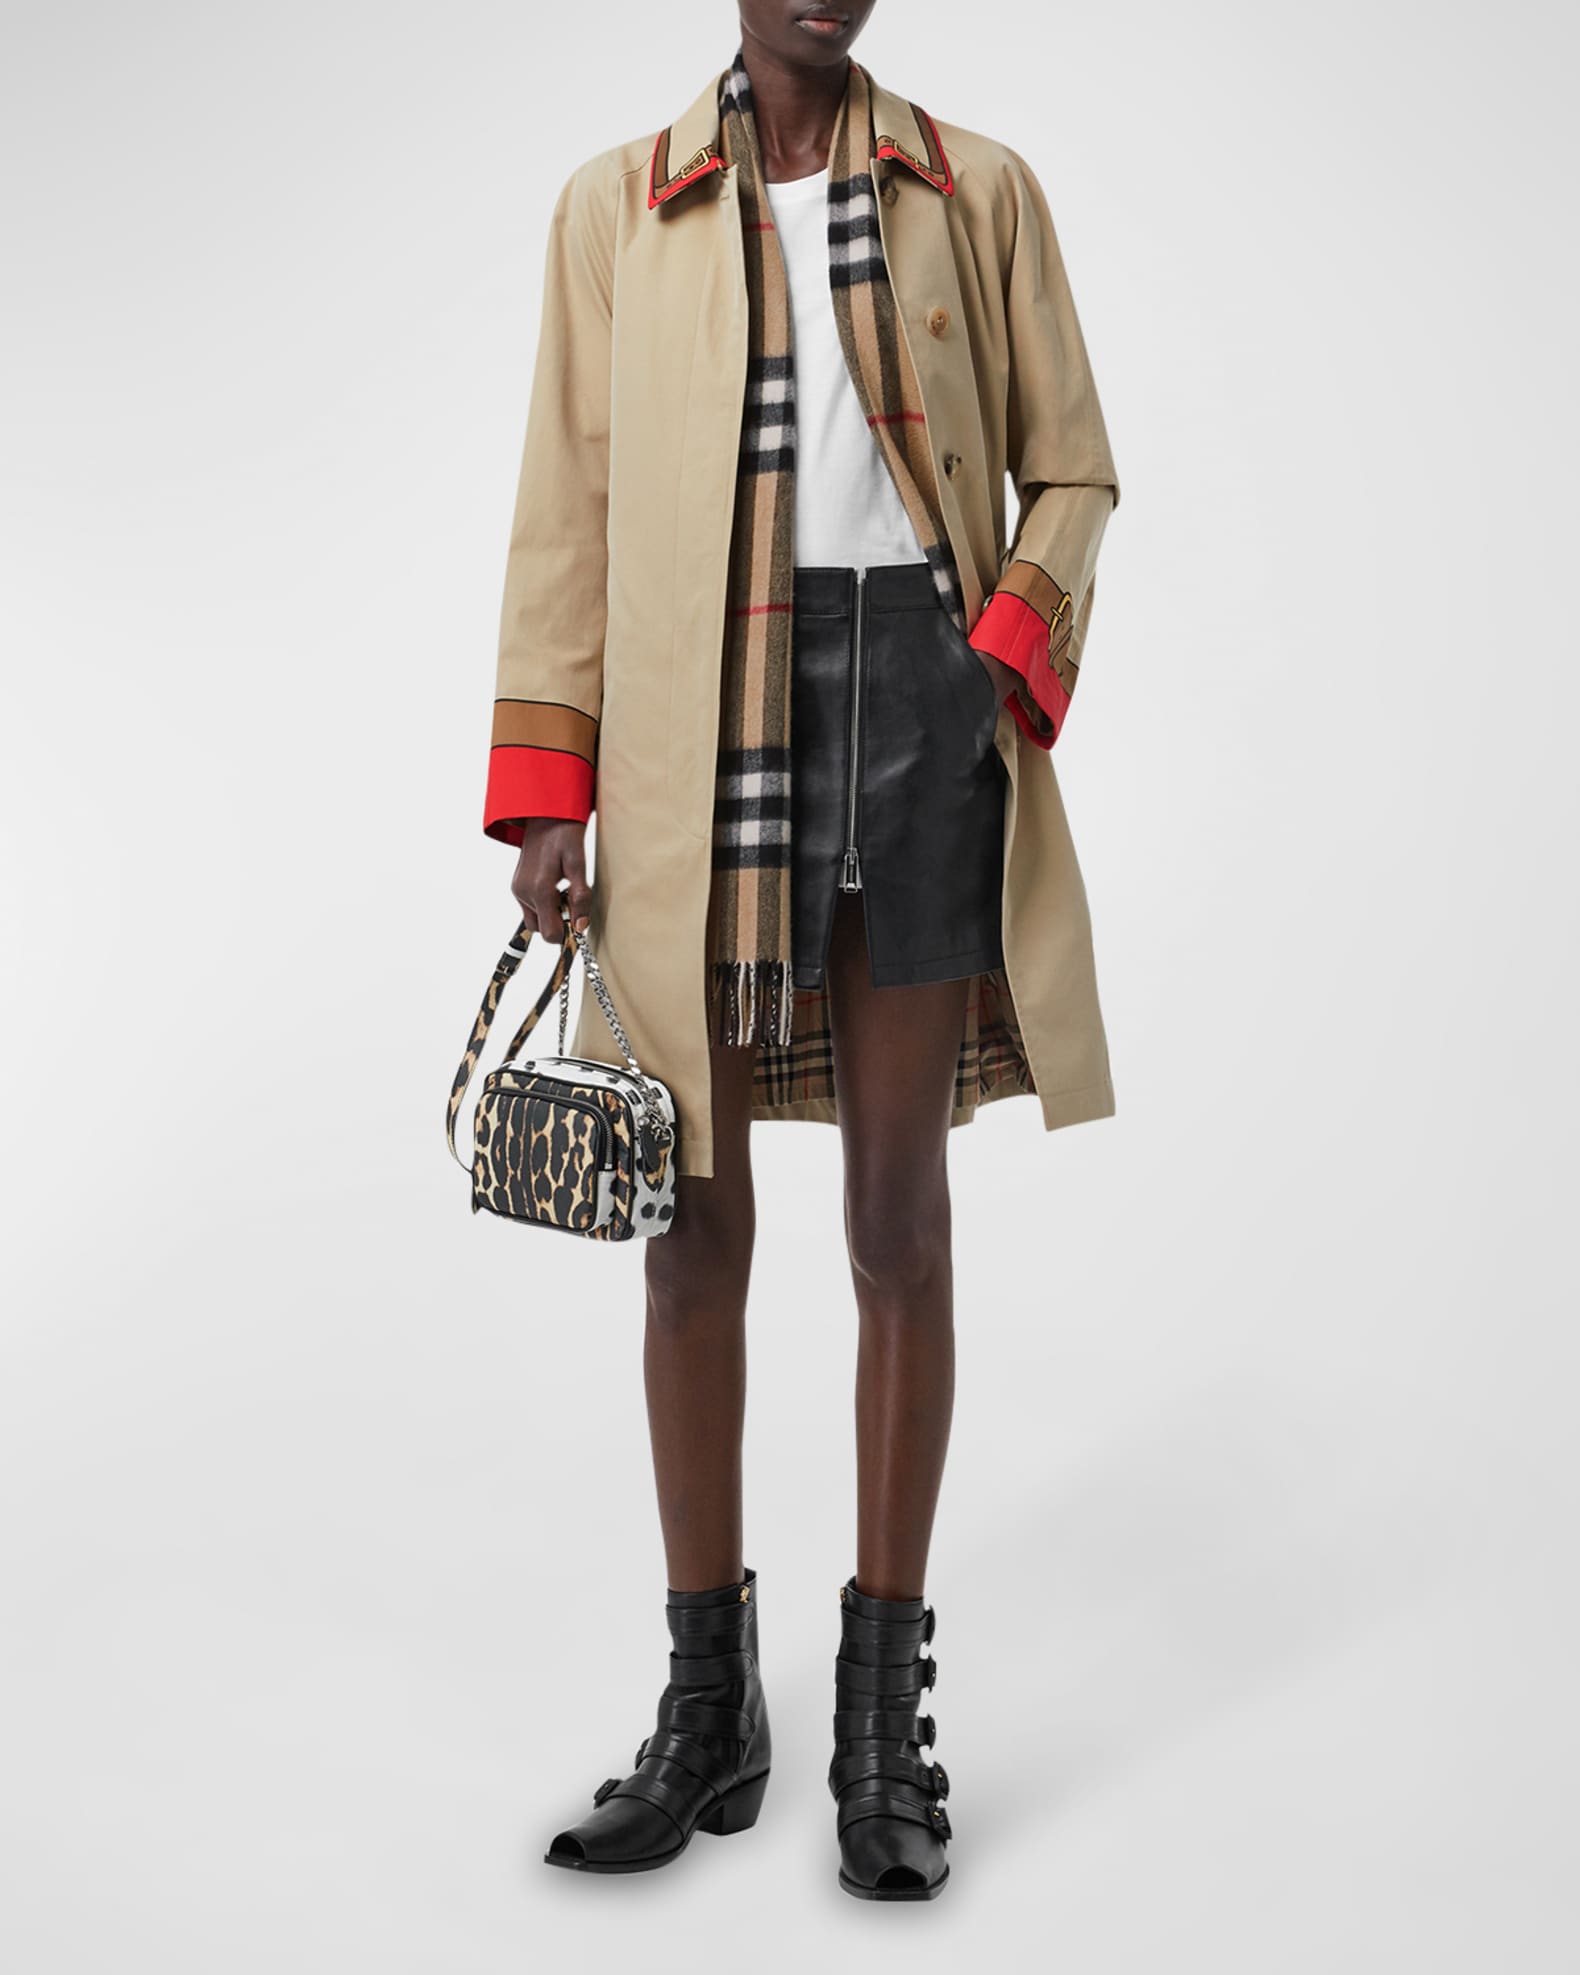 Burberry Heart Scarf Outfit - FORD LA FEMME